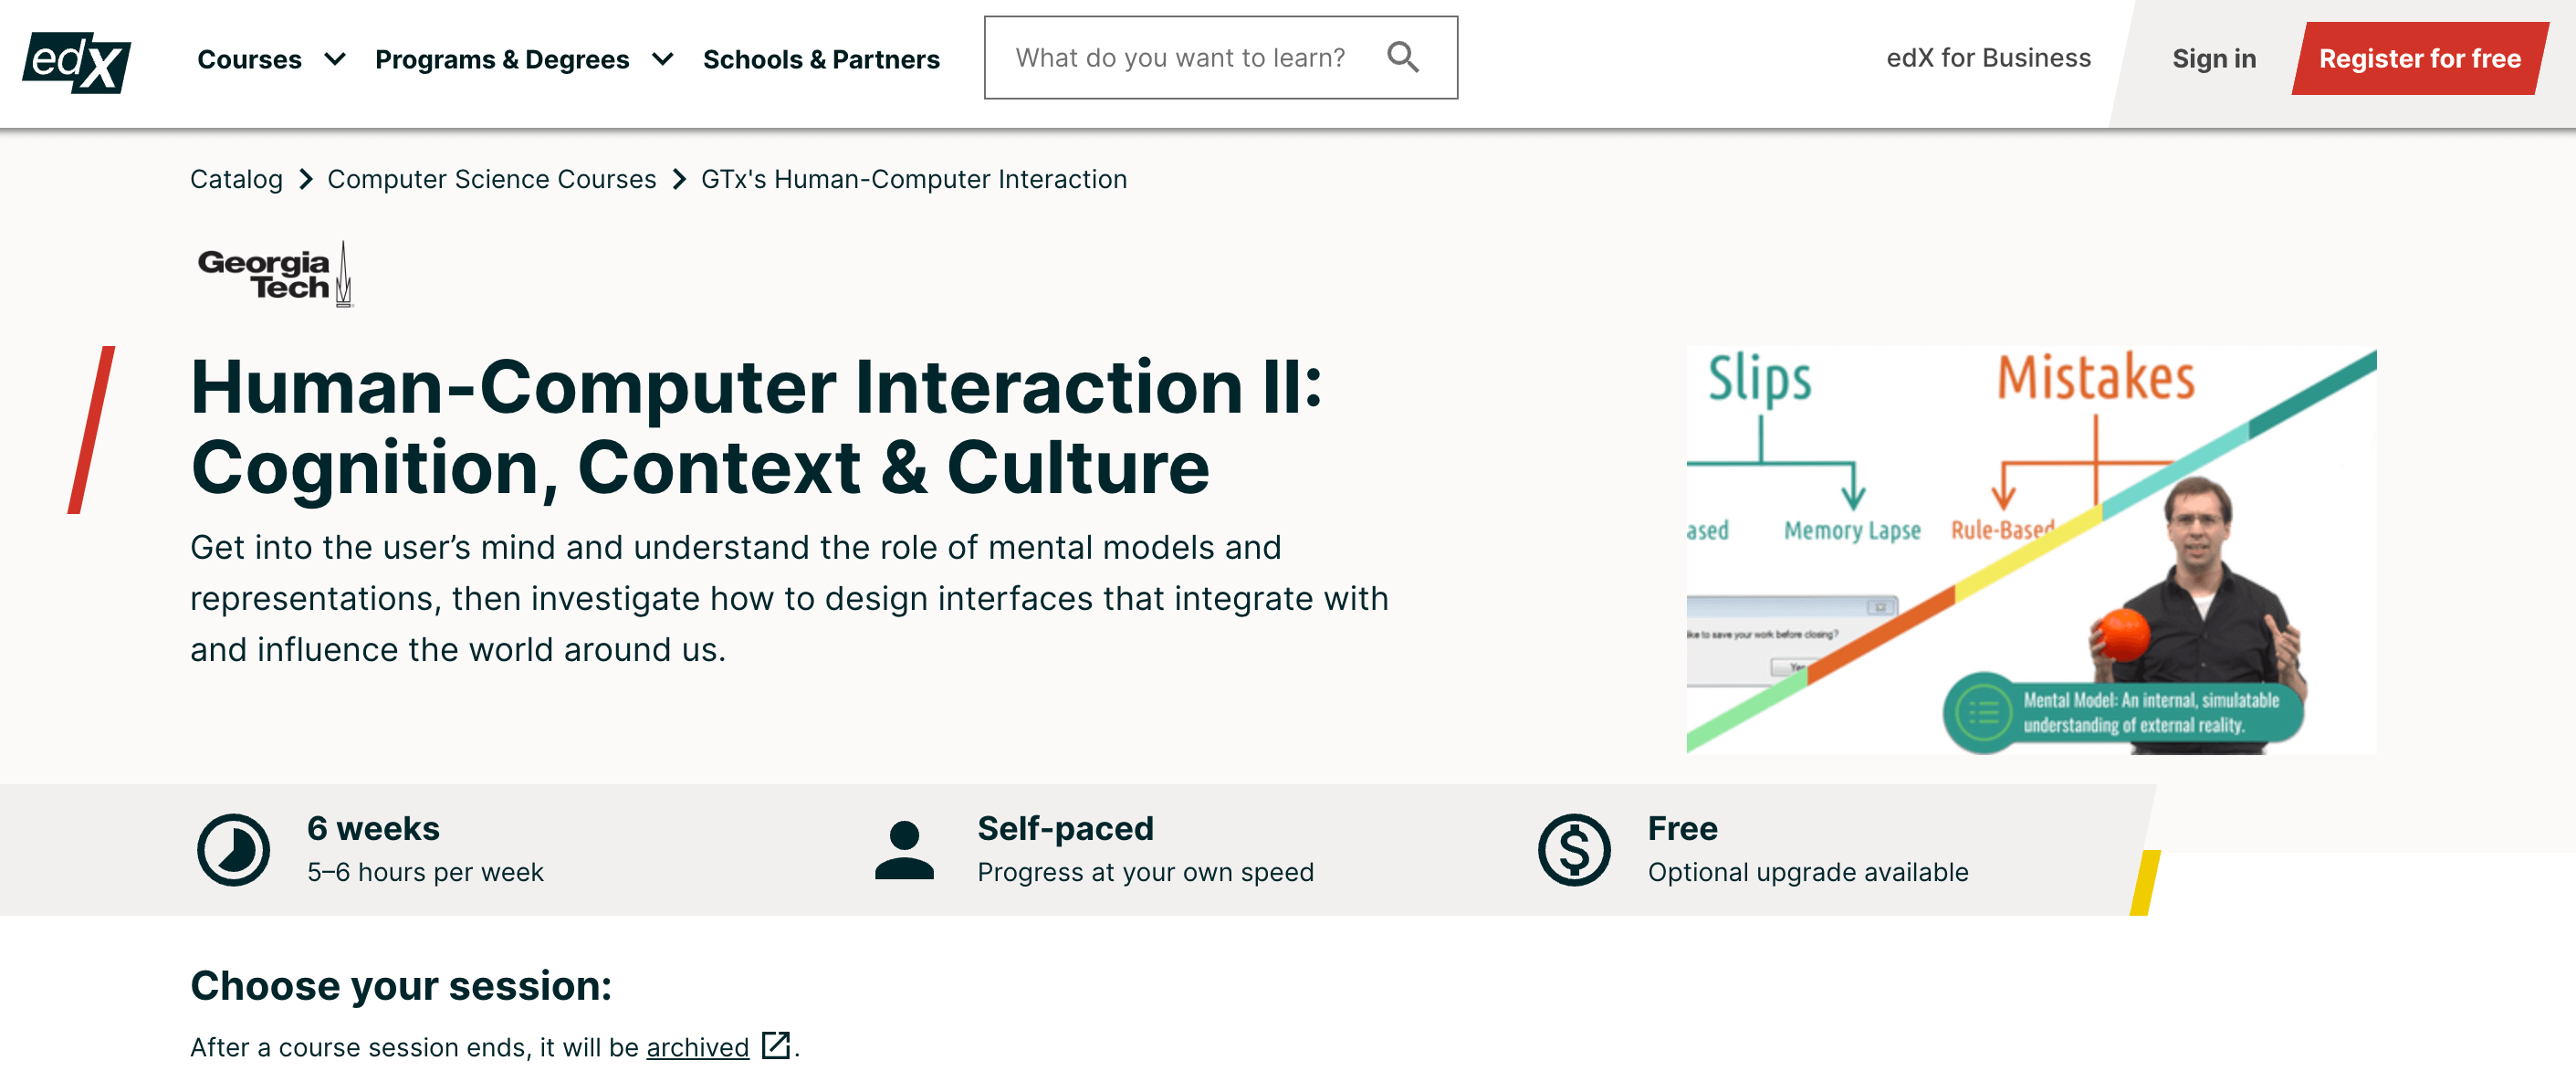 Georgia Tech’s Human Computer Interaction II: Cognition, Context and Culture on edX